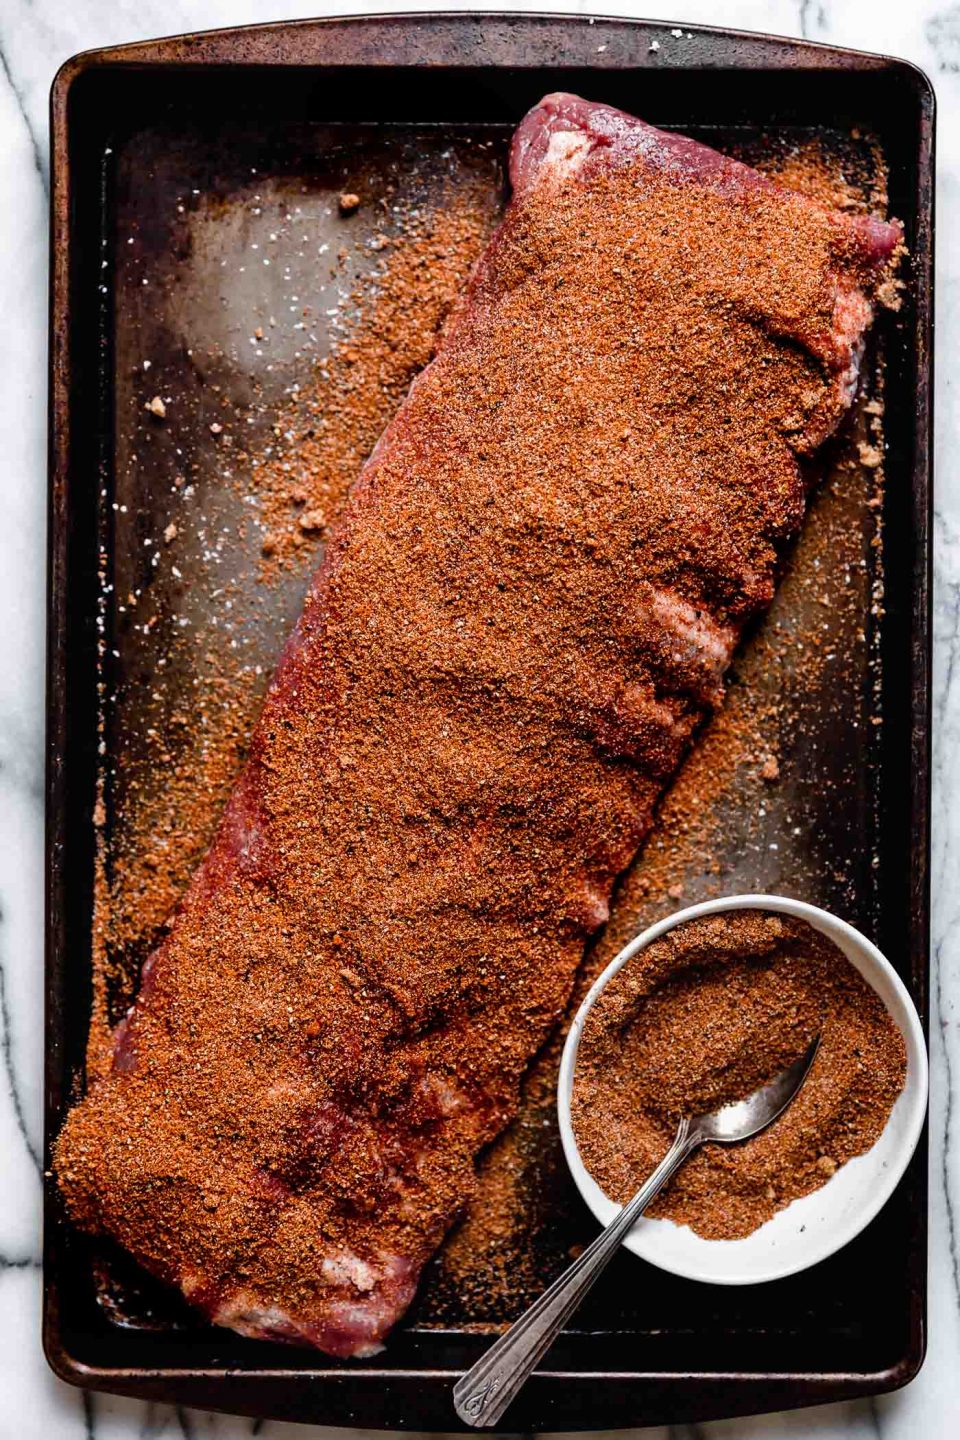 A rack of ribs, seasoned generously with dry rub for baby back ribs, on a patina baking sheet on a white marble surface.